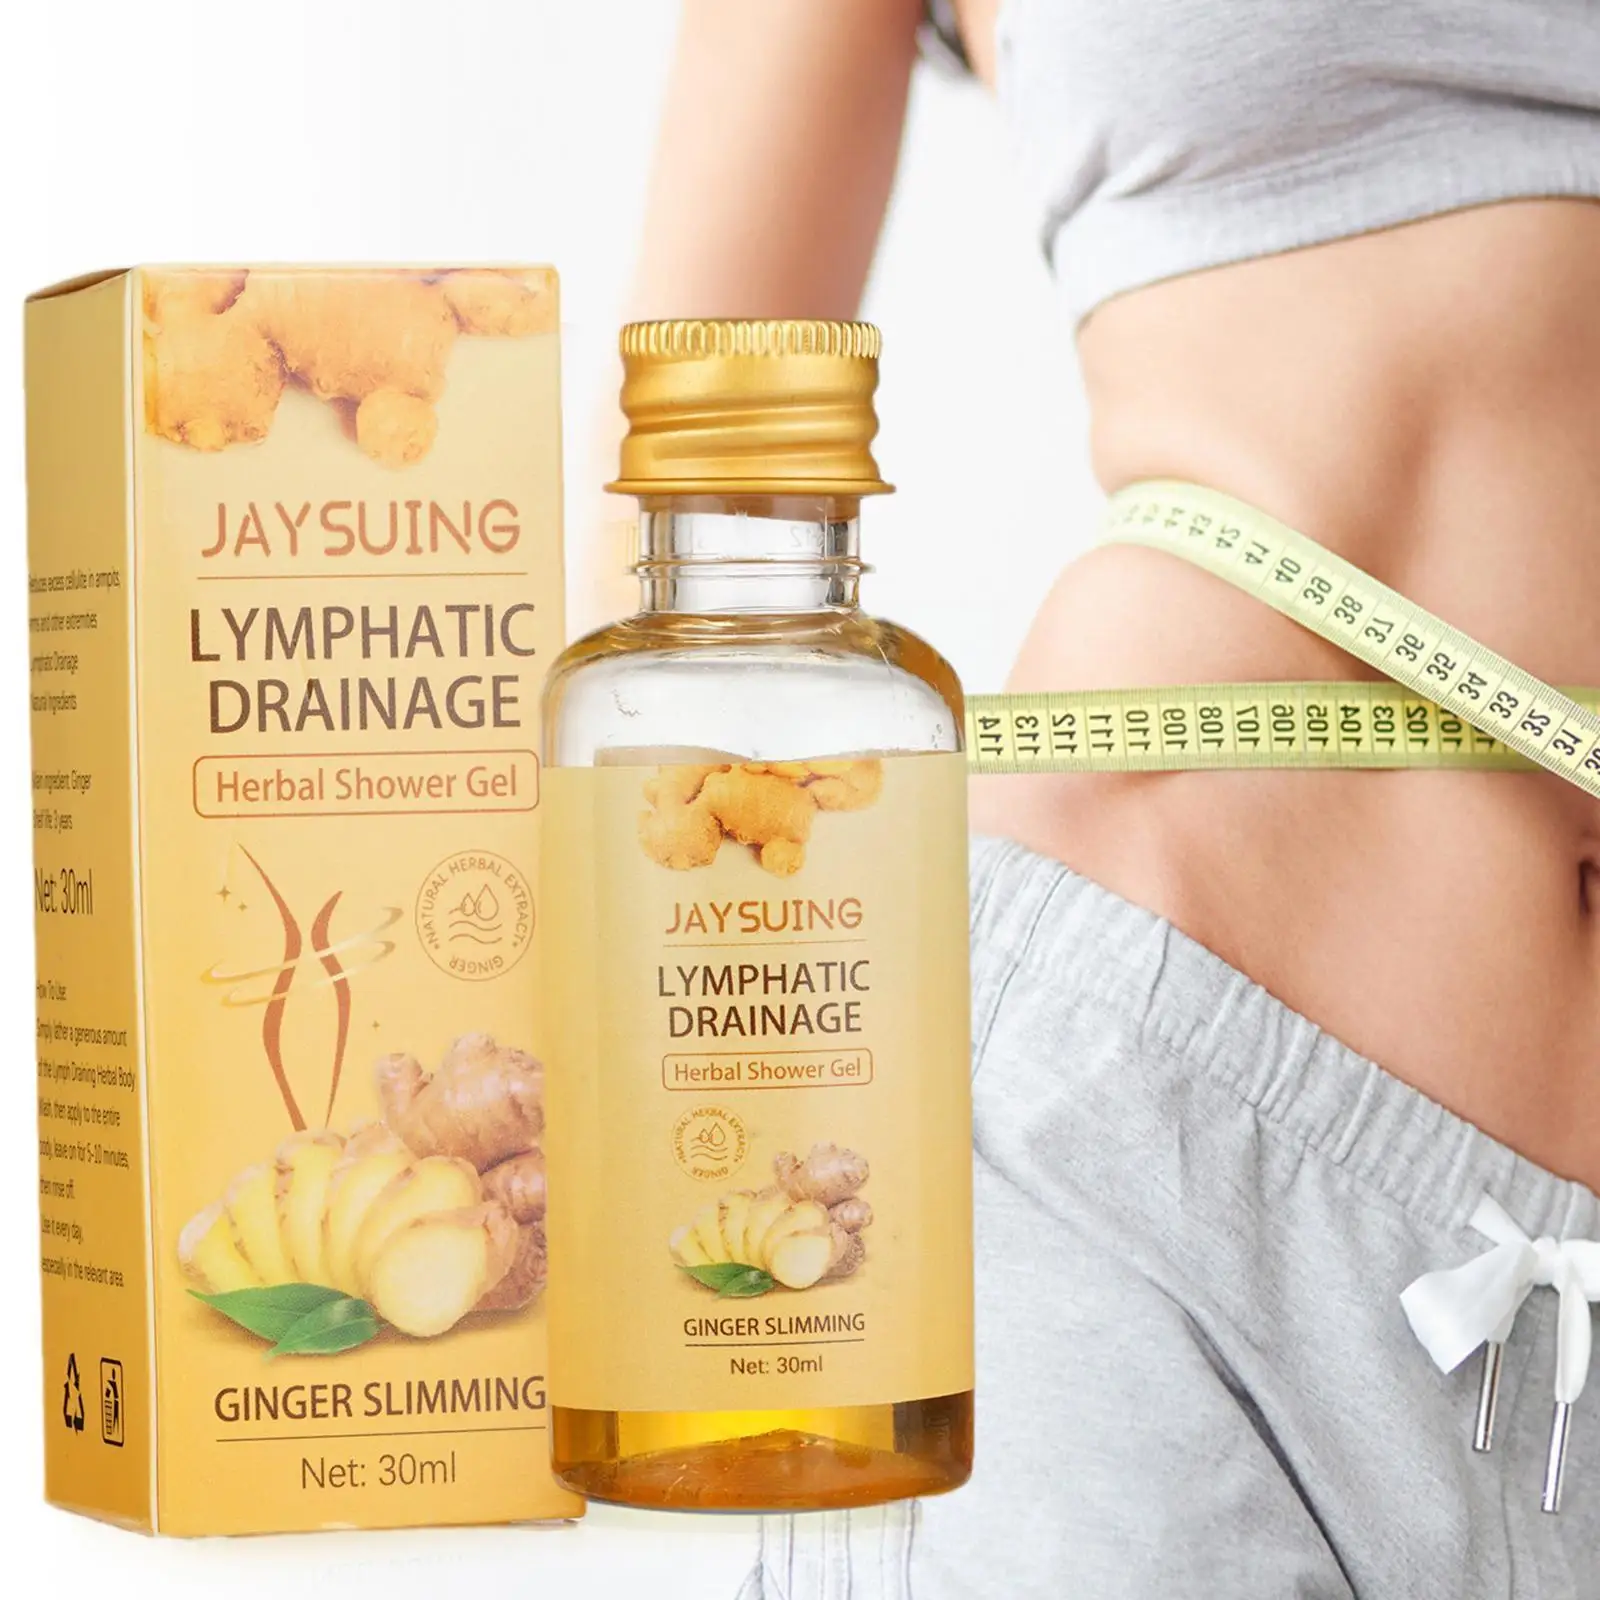 

Ginger Slimming Losing Weight Cellulite Remover Lymphatic Herbal Body Drainage Care Beauty Gel Shower Health Firm Q0Z3